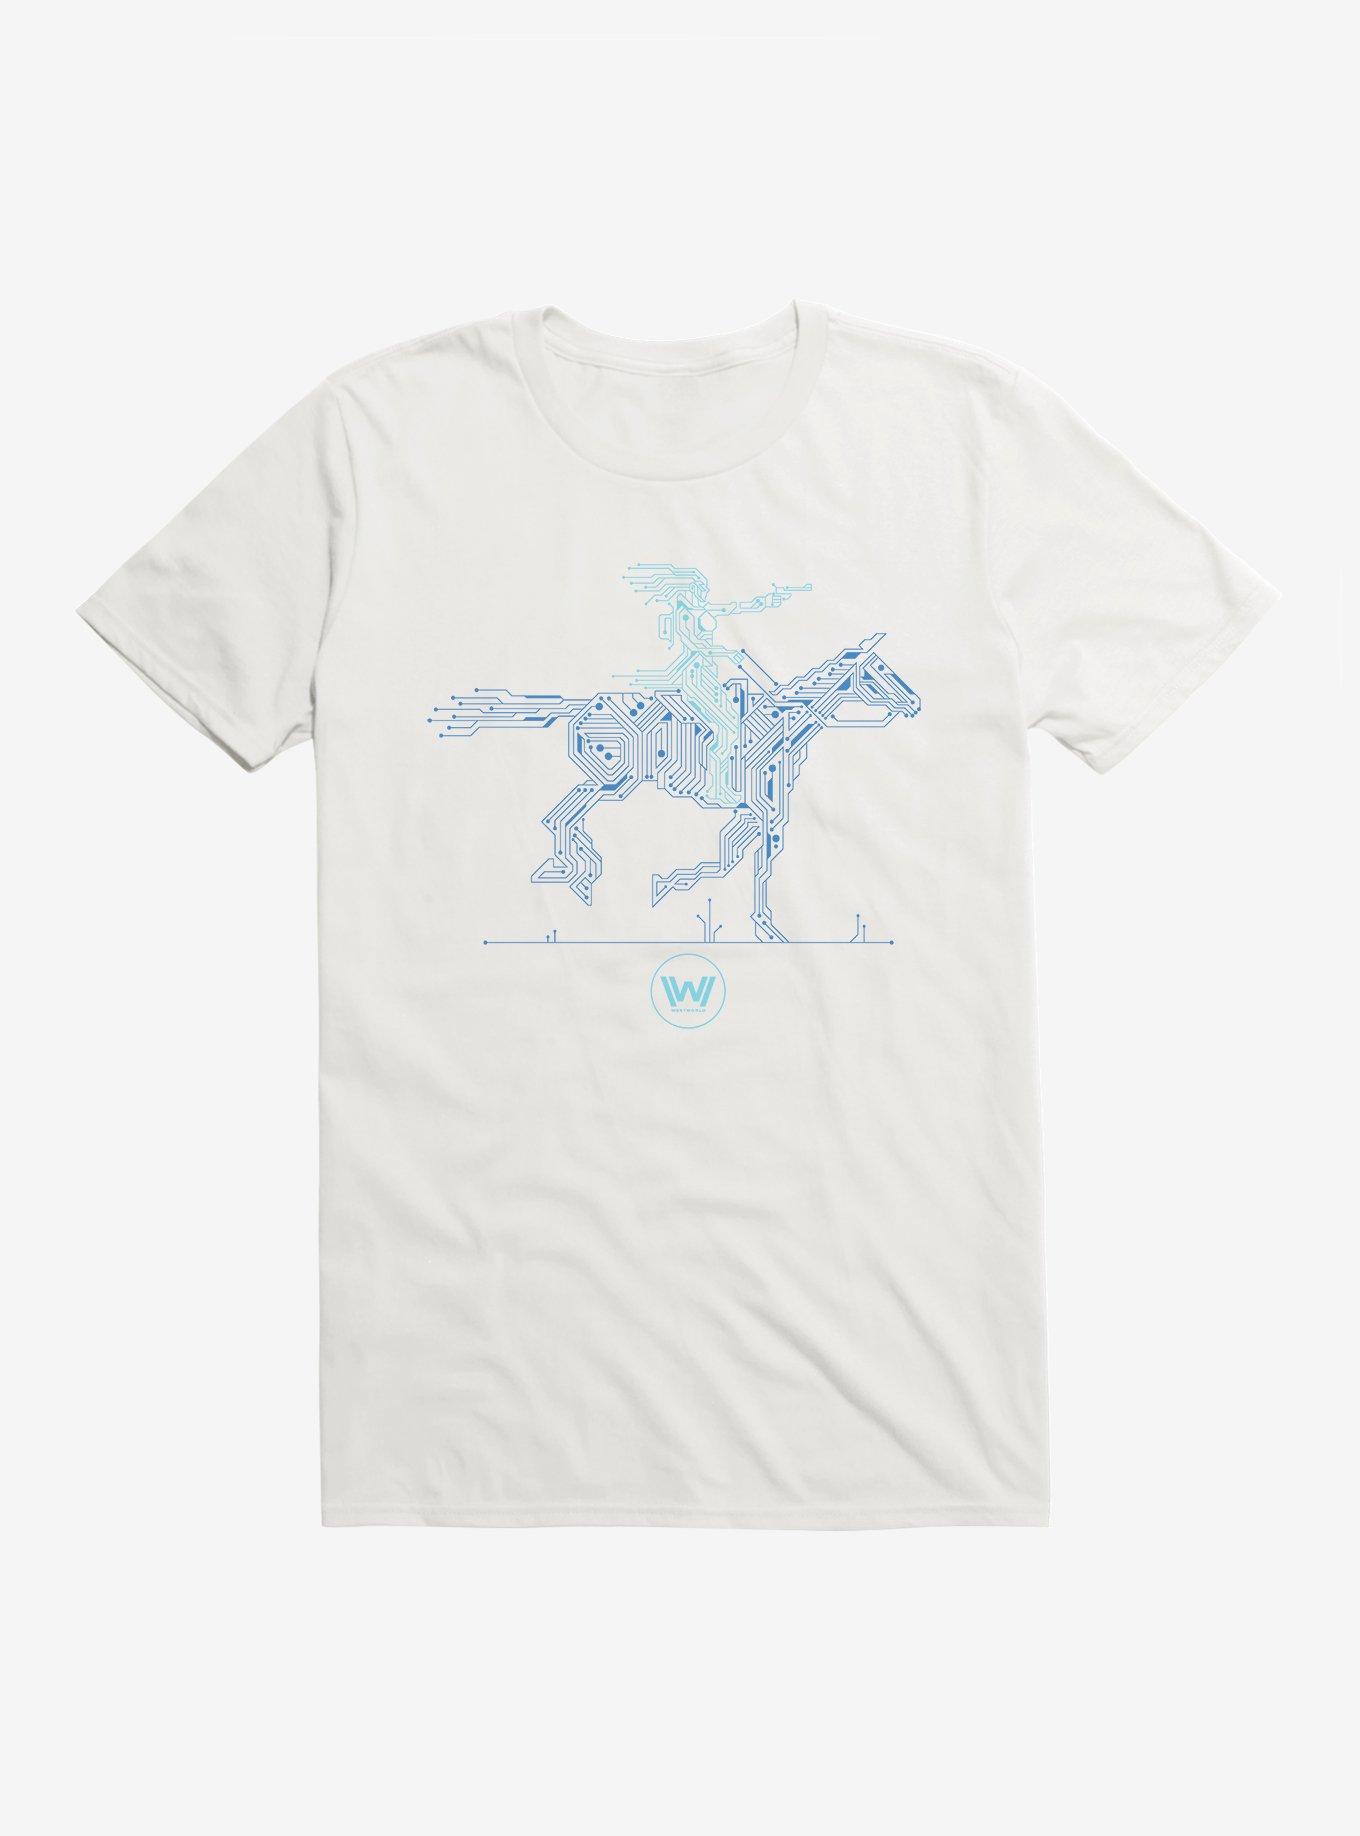 Westworld Android And Horse T-Shirt, , hi-res